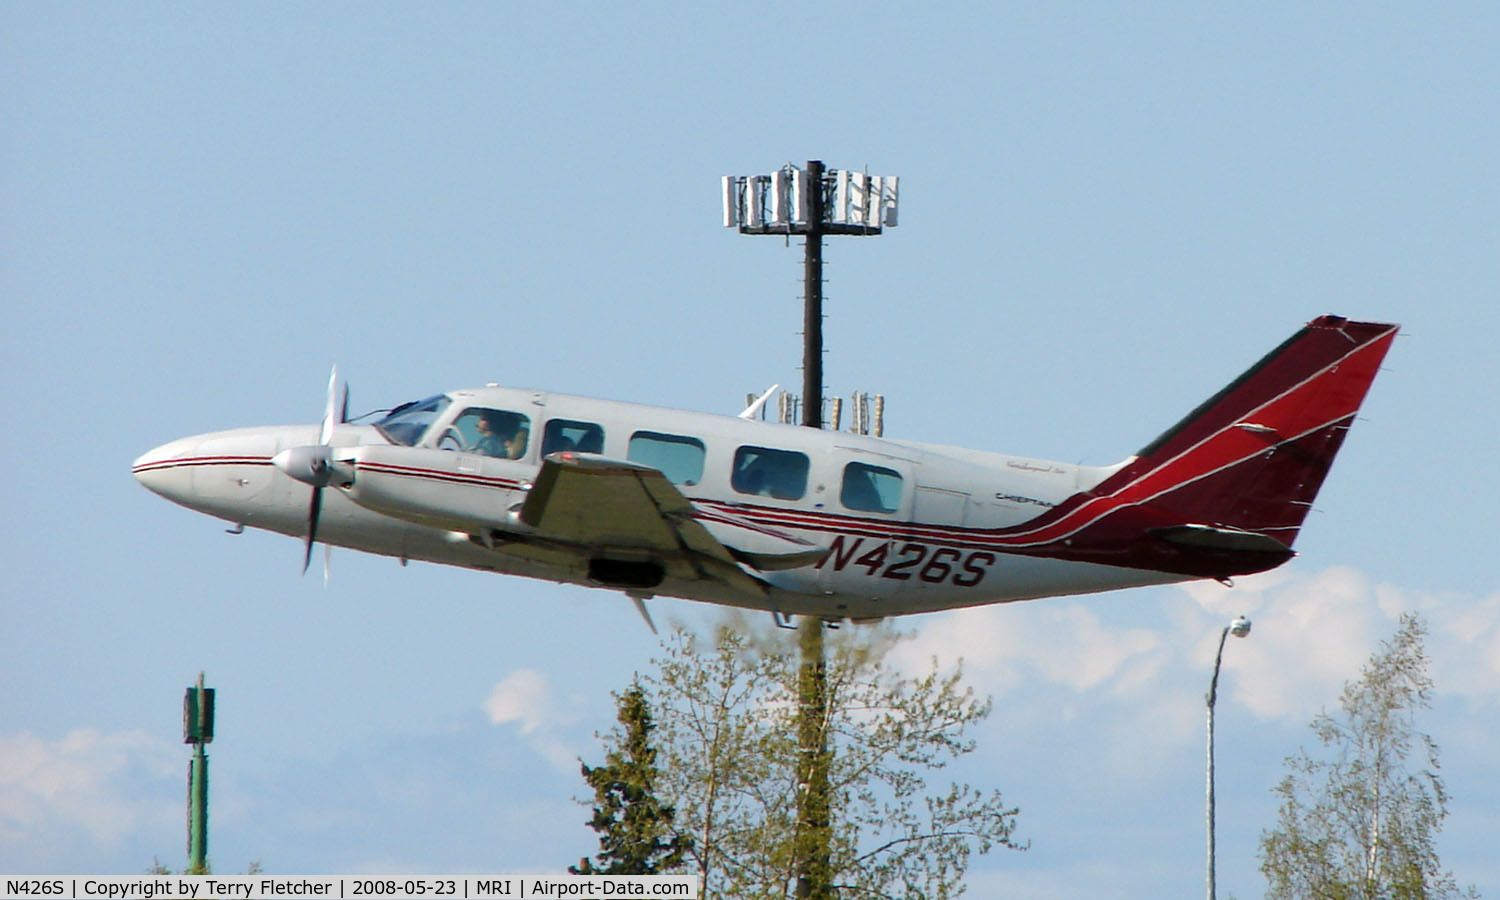 N426S, 1981 Piper PA-31-350 Chieftain C/N 31-8152190, Piper Pa-31-350 takes off from Merrill Field